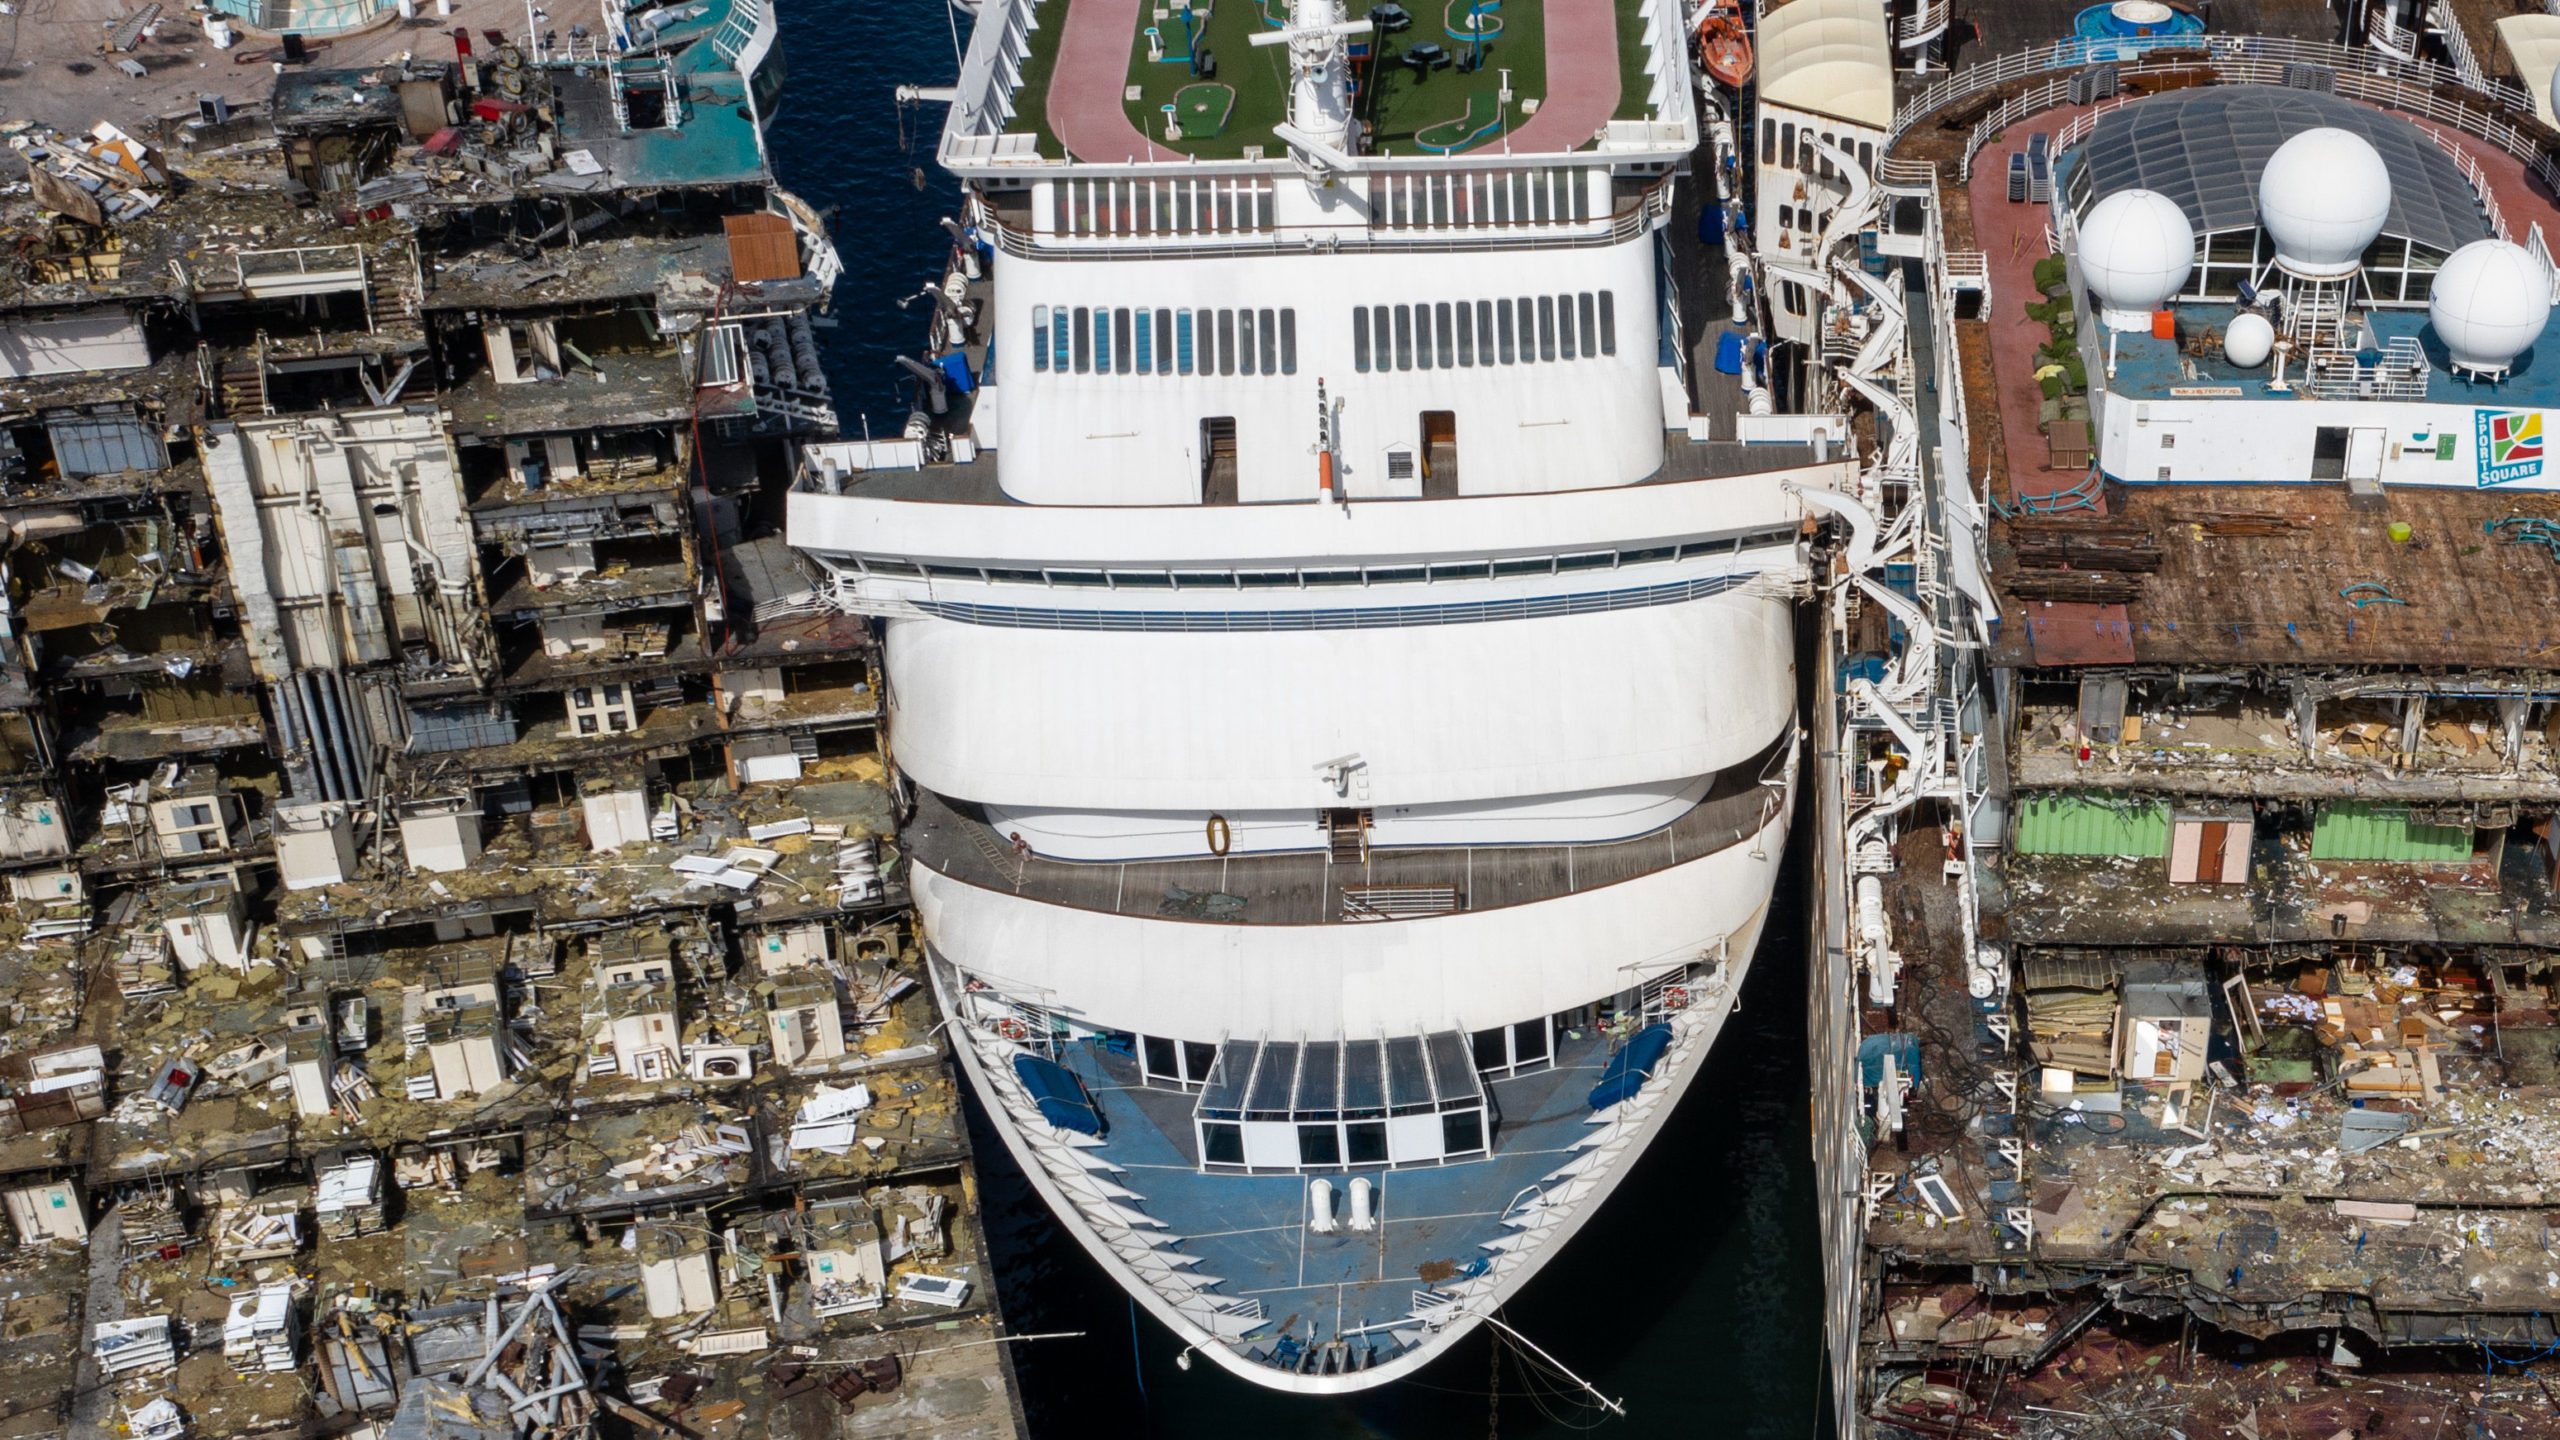 In this aerial view from a drone, luxury cruise ships are seen being broken down for scrap metal at the Aliaga ship recycling port on October 02, 2020 in Izmir, Turkey. (Photo: Chris McGrath, Getty Images)